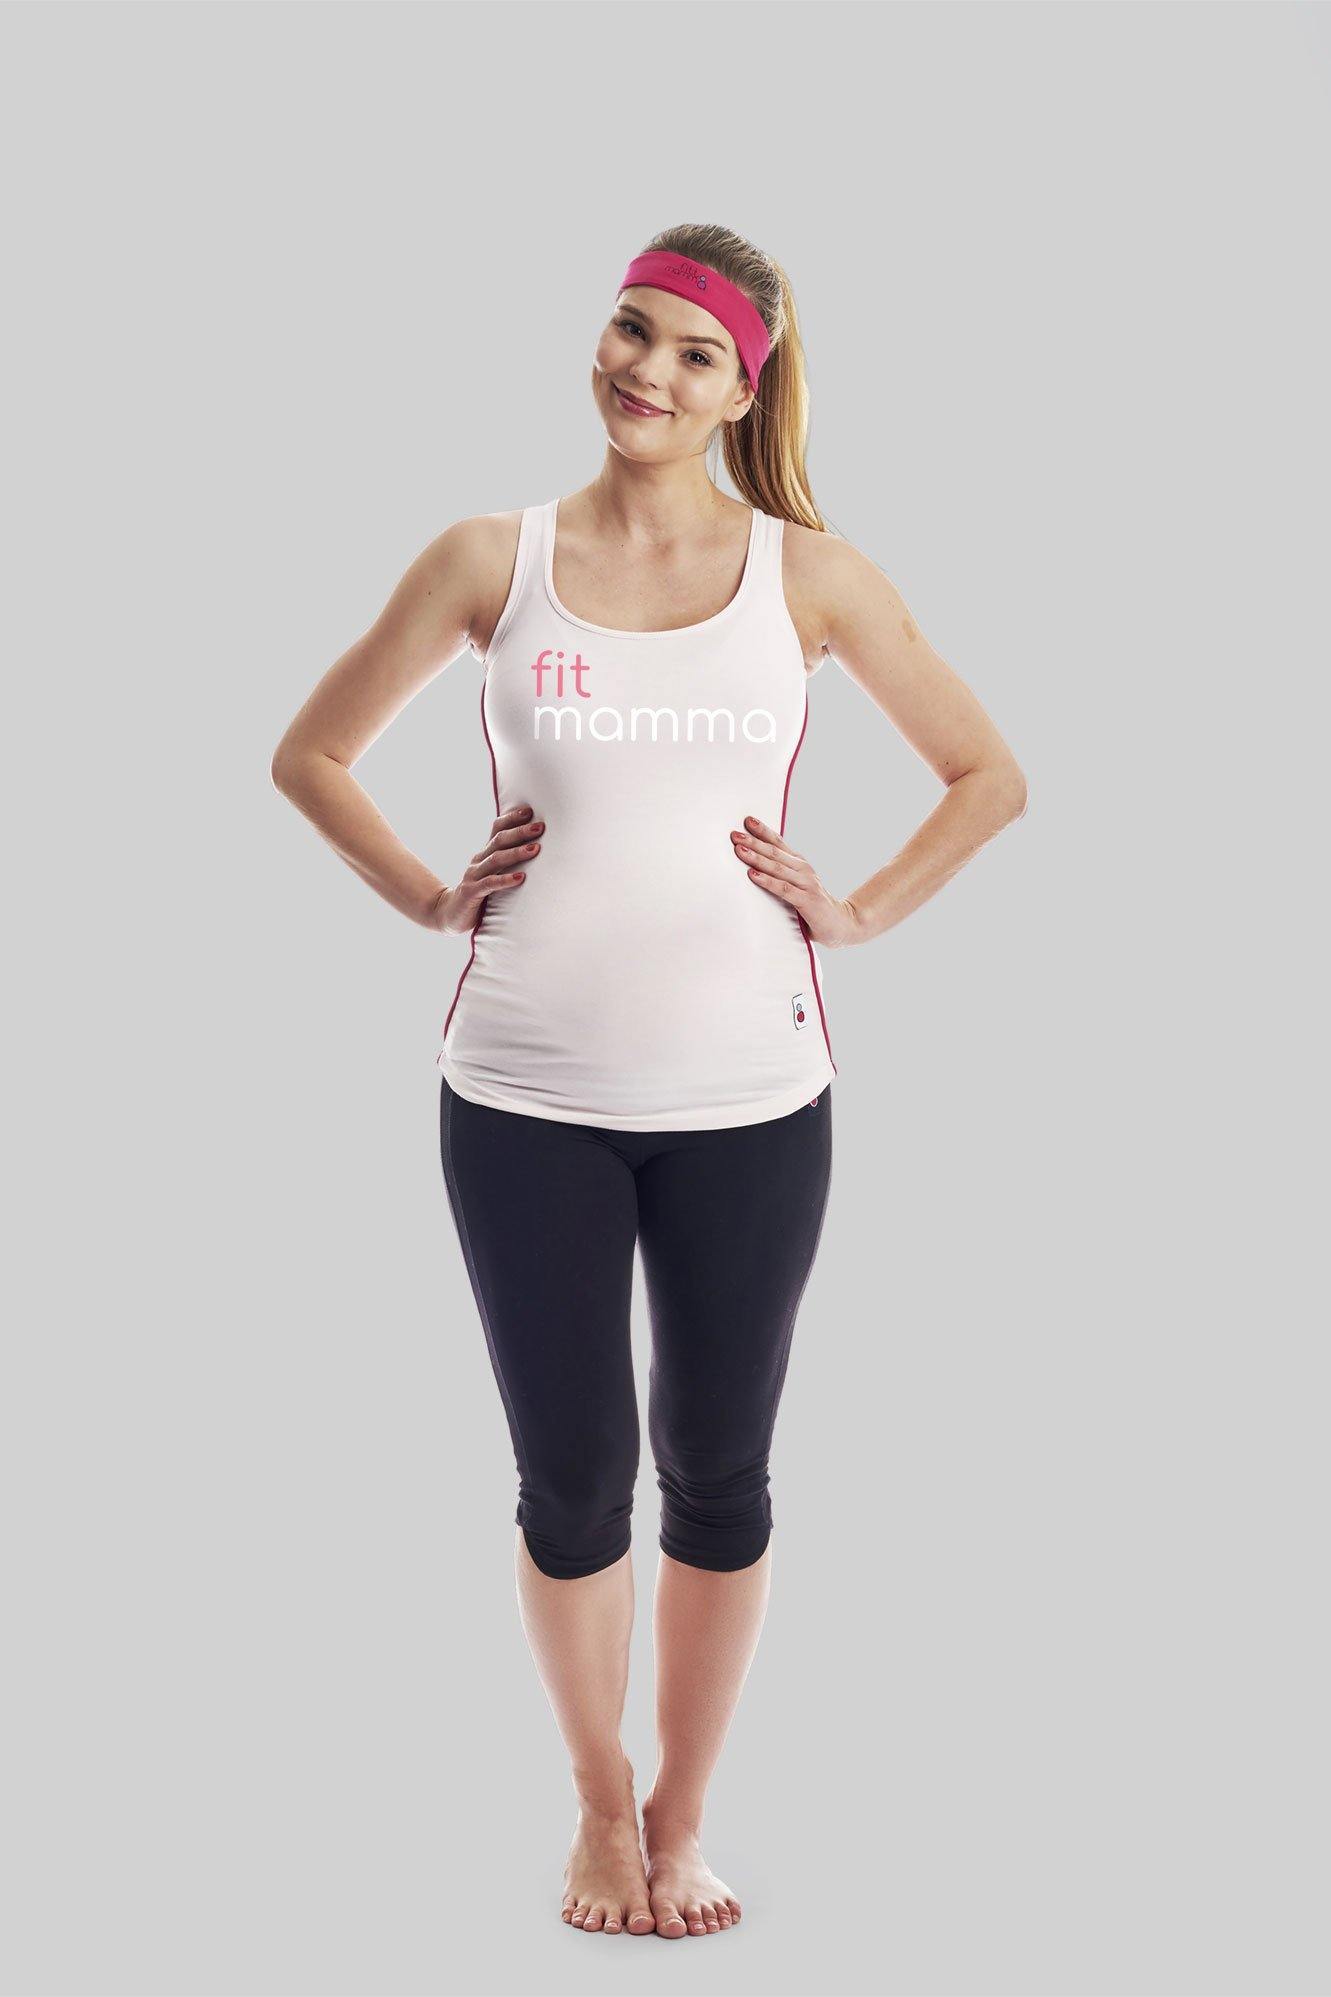 FitMamma Maternity Workout Support Top - FittaMamma